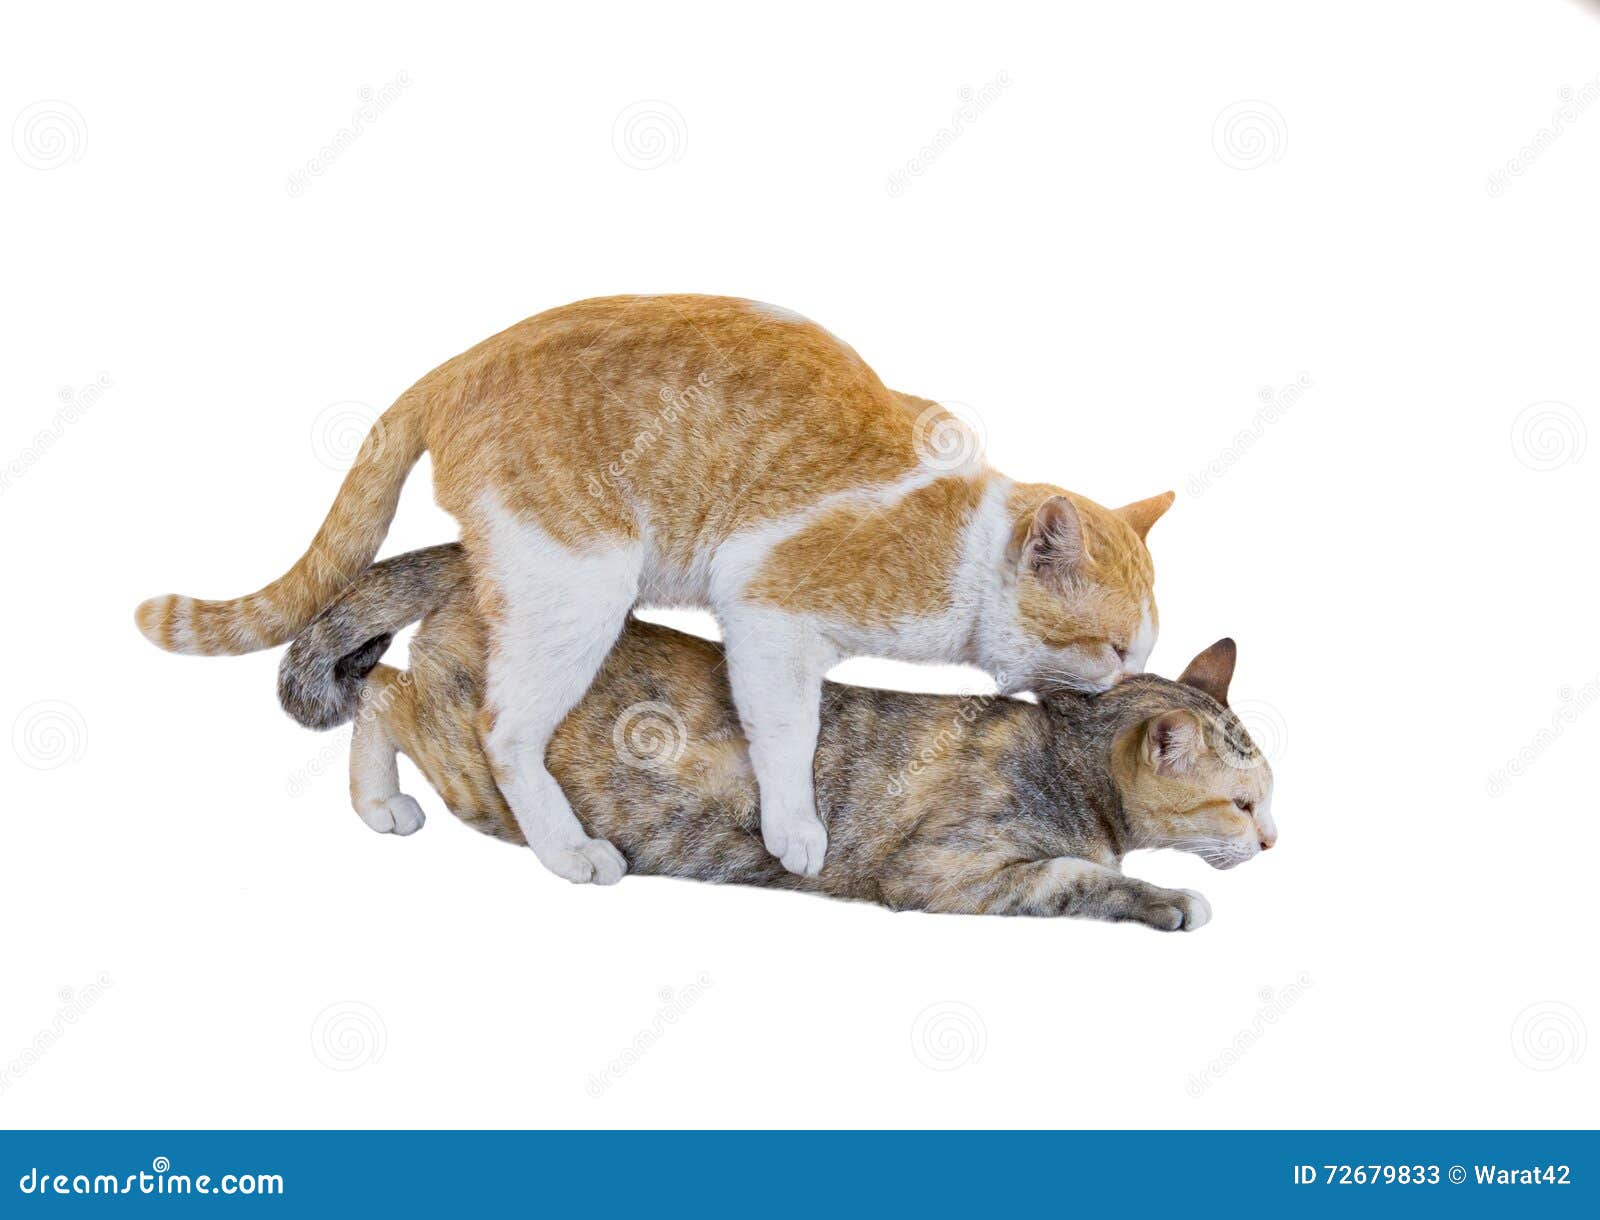 https://thumbs.dreamstime.com/z/two-cat-mating-background-isolated-72679833.jpg